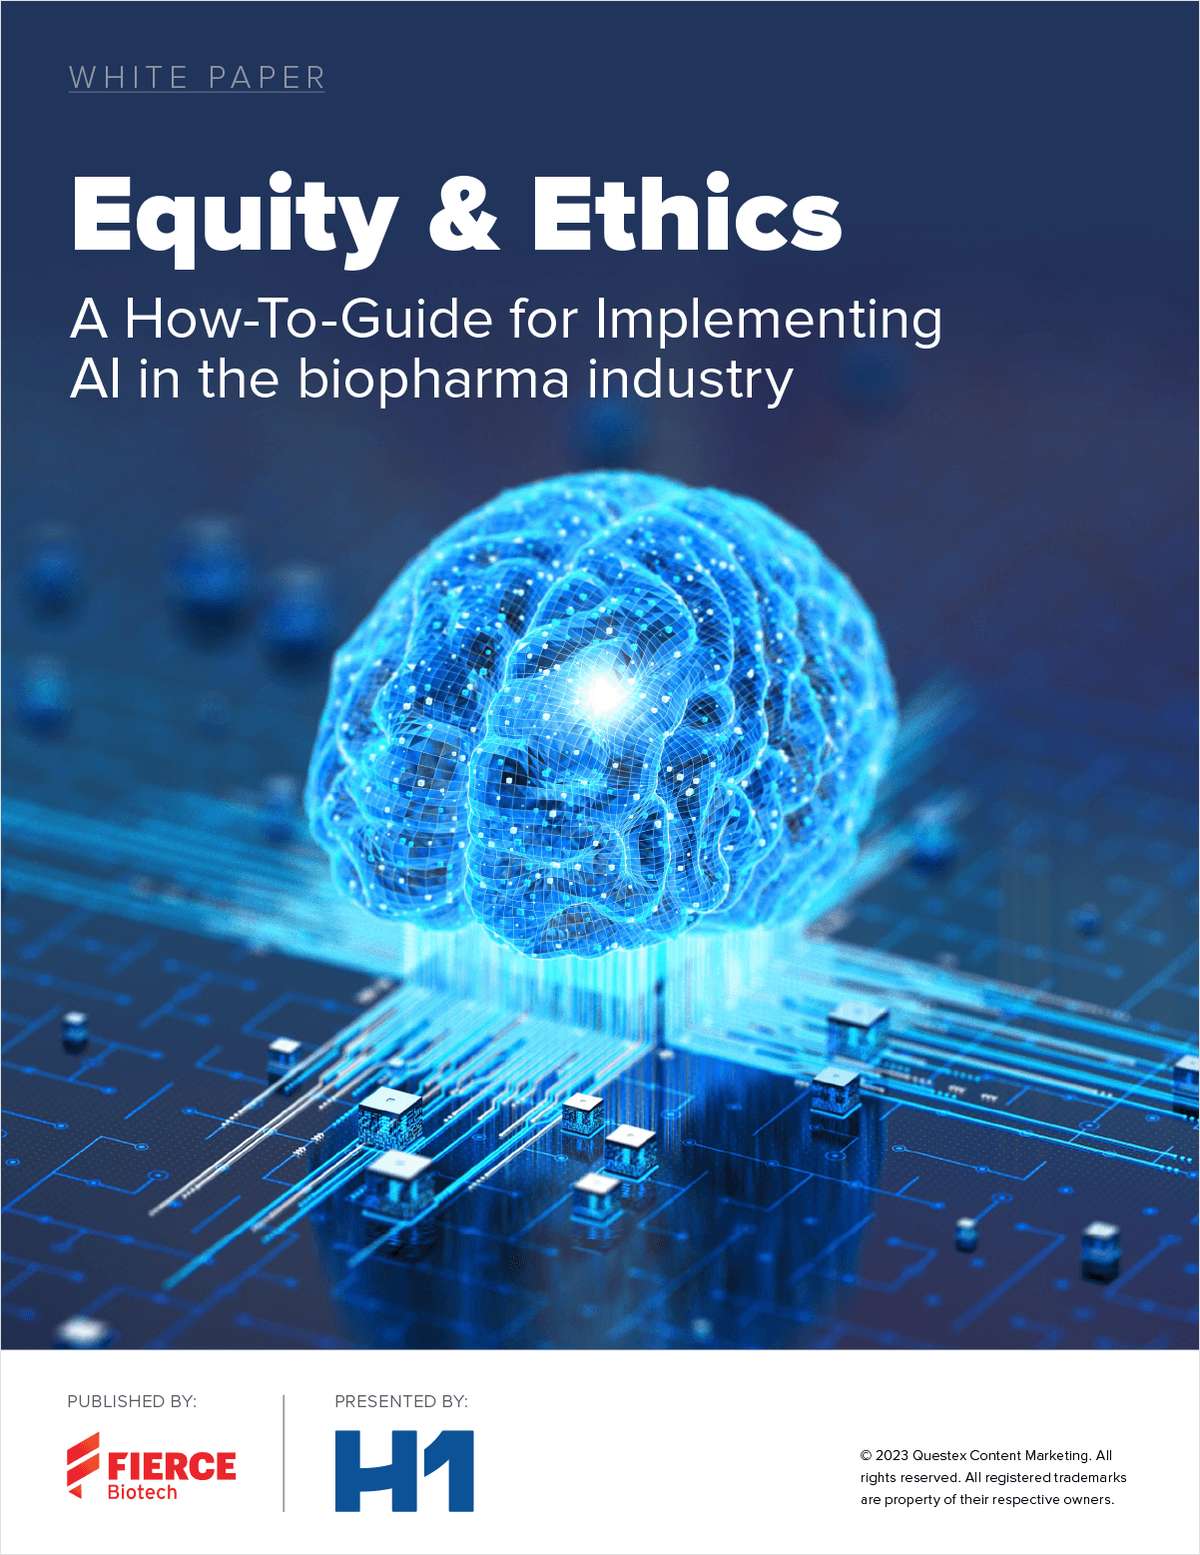 Equity & Ethics a How-To-Guide for Implementing AI in the Biopharma Industry